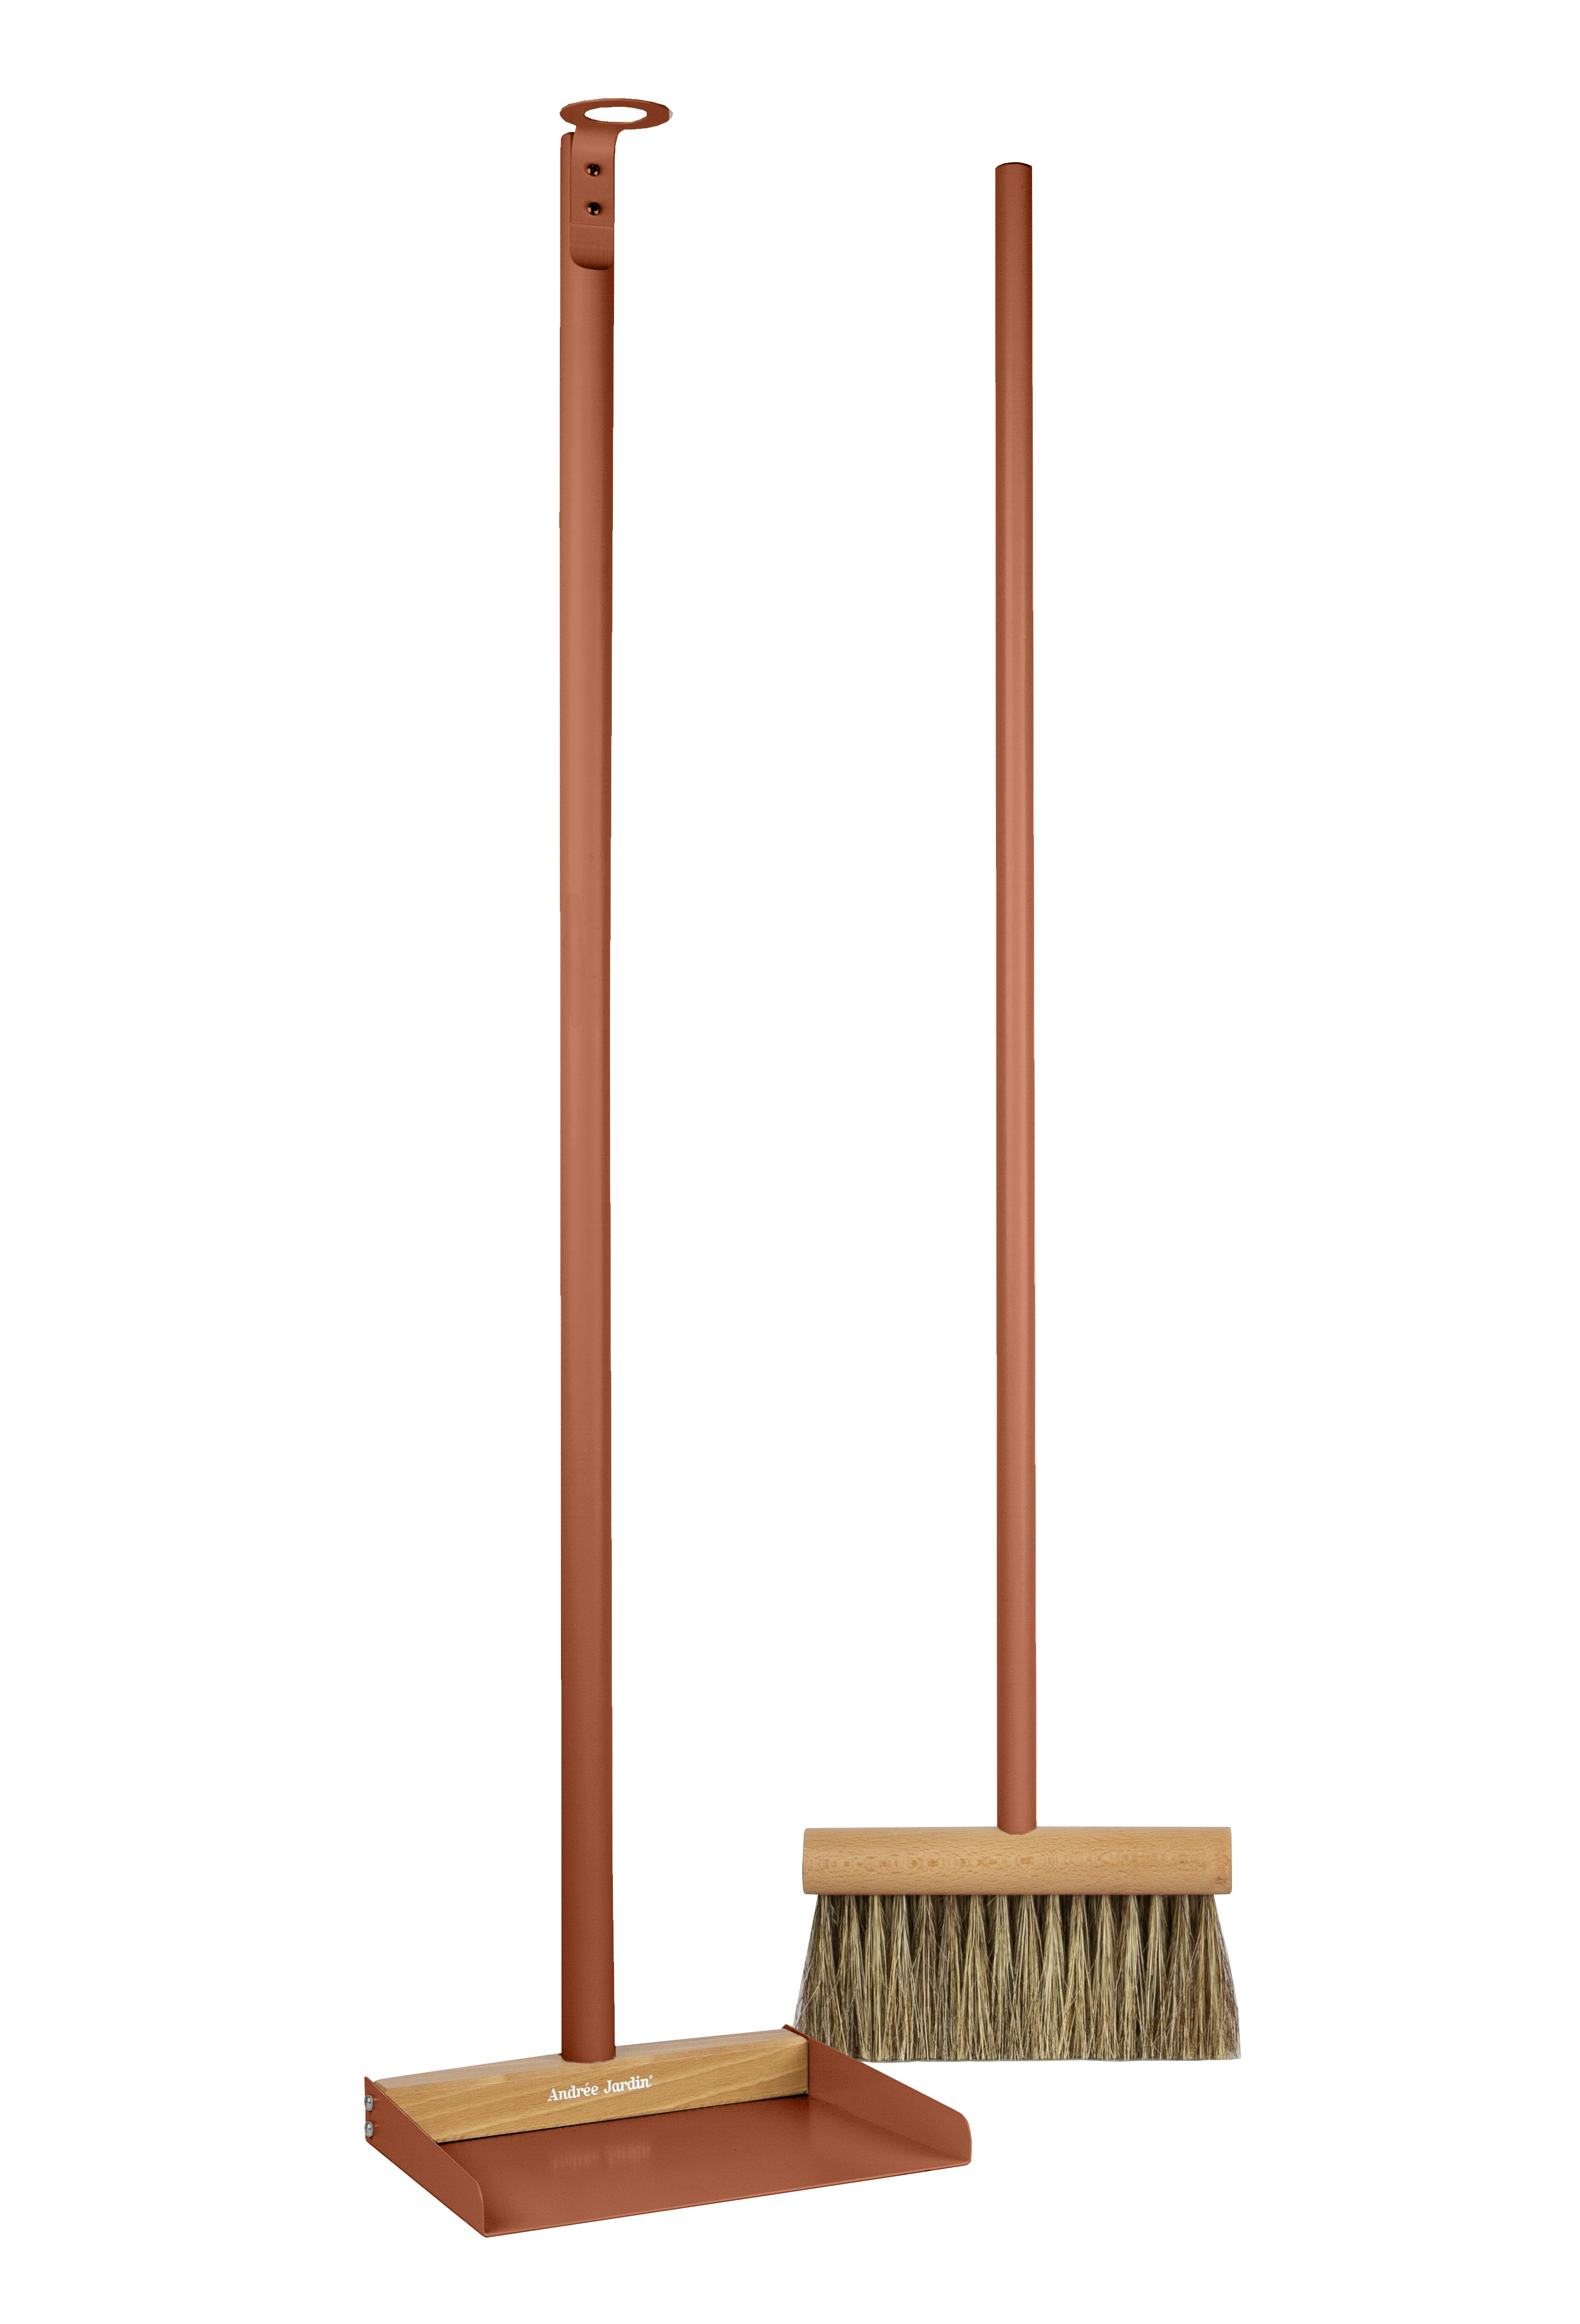 Andrée Jardin Mr. and Mrs. Clynk Natural Large Complet Dustpan and Broom Brick Red Utilities Andrée Jardin Brand_Andrée Jardin Home_Broom Sets Home_Household Cleaning New Arrivals pelle-balayette-long-manche-clynk-3142-PNG_ac595e32-c12a-4187-a31d-653132985562